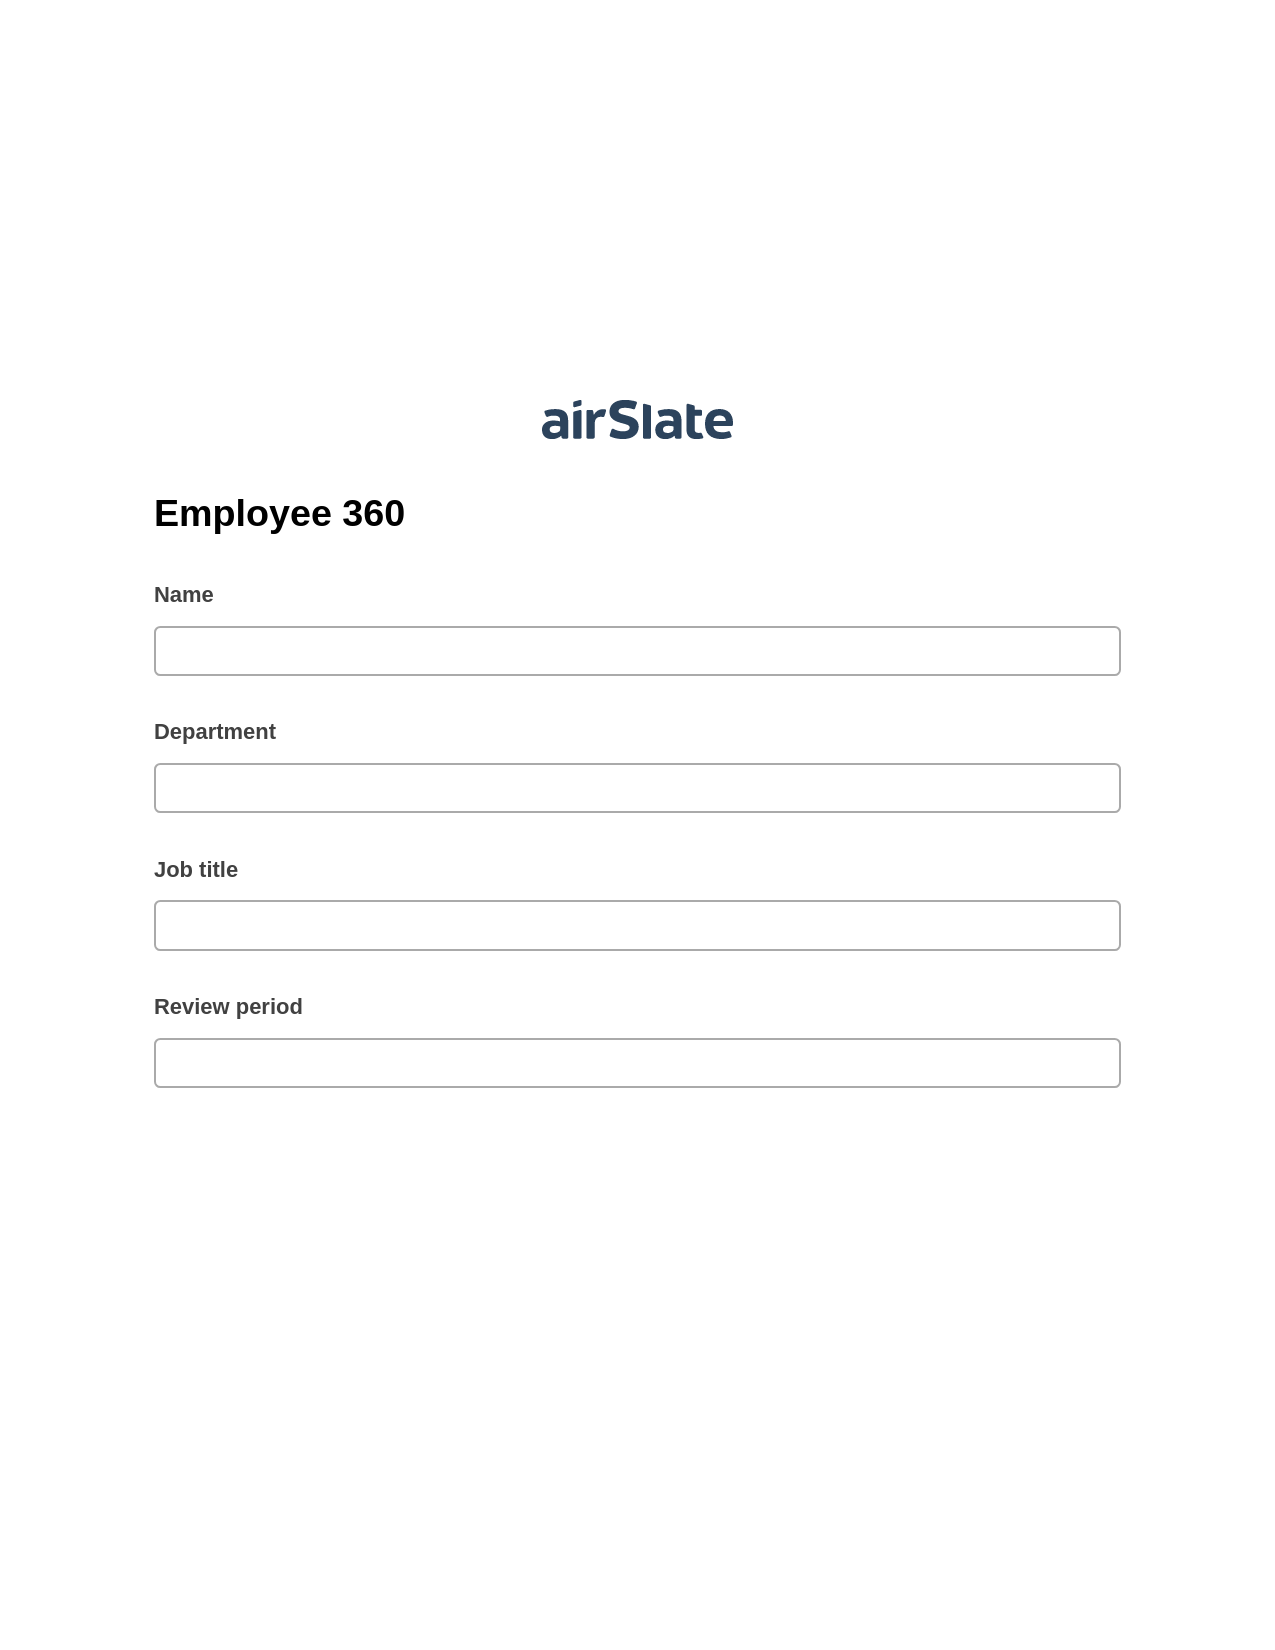 Multirole Employee 360 Pre-fill from MS Dynamics 365 Records, Create MS Dynamics 365 Records Bot, Archive to SharePoint Folder Bot